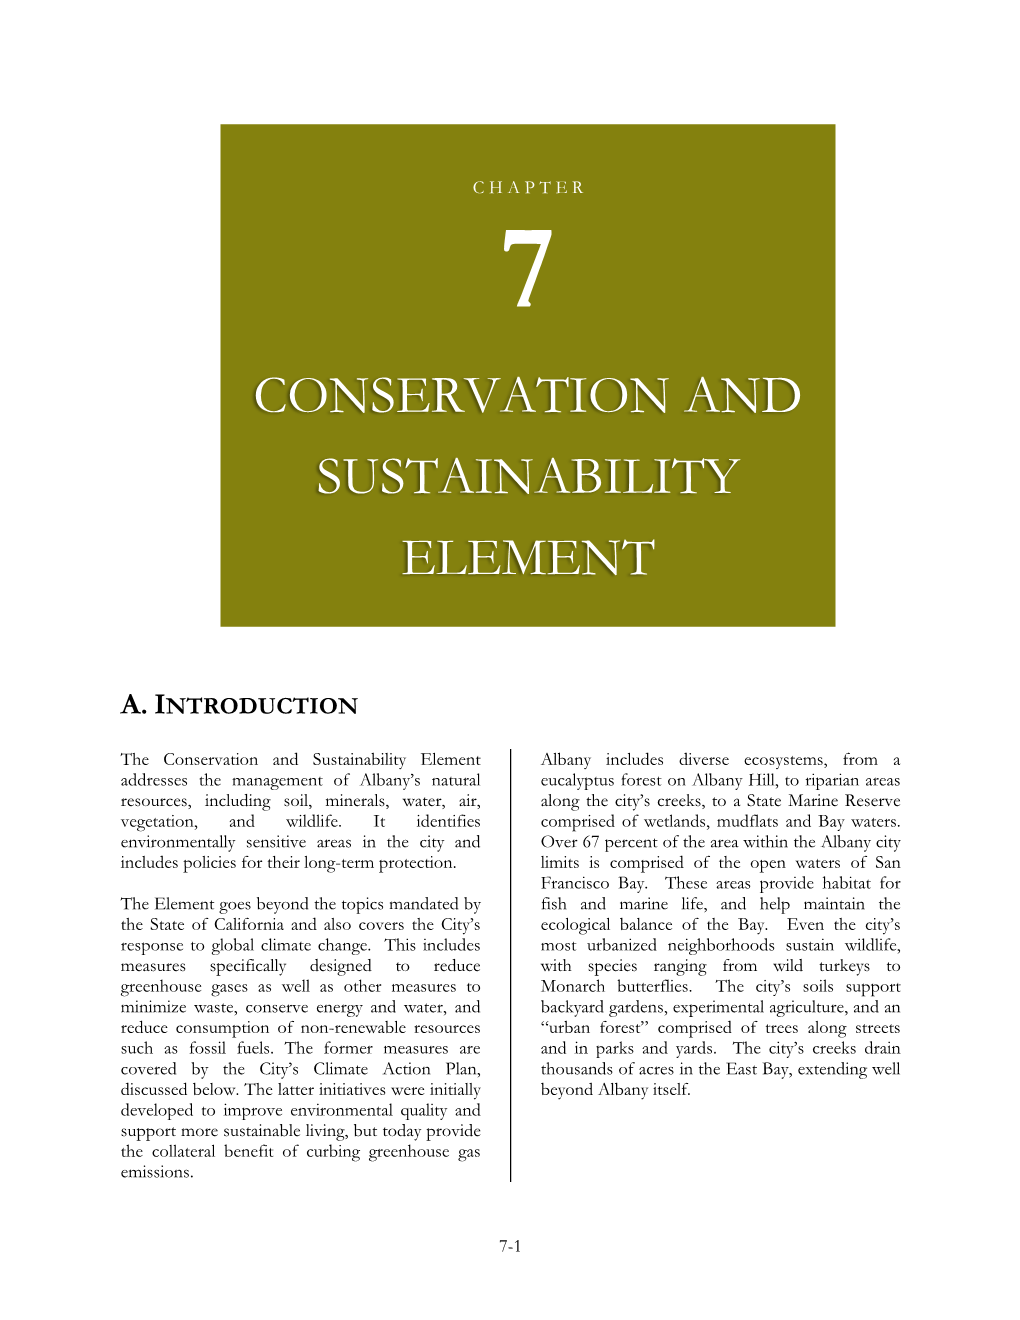 Conservation and Sustainability Element